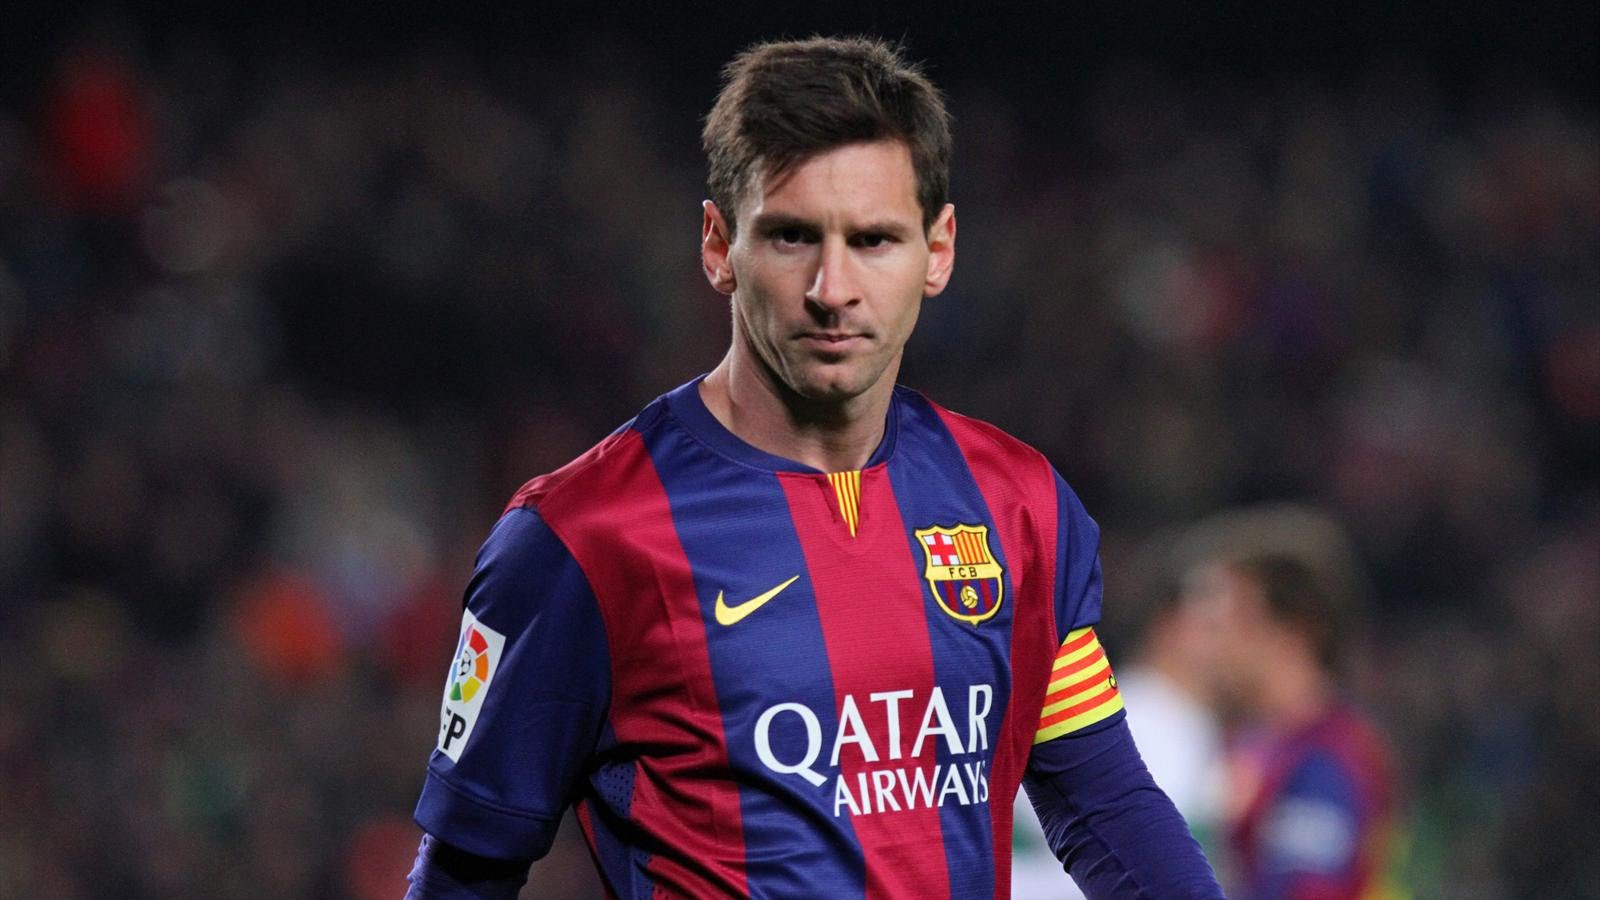 Nice wallpapers Lionel Messi 1600x900px